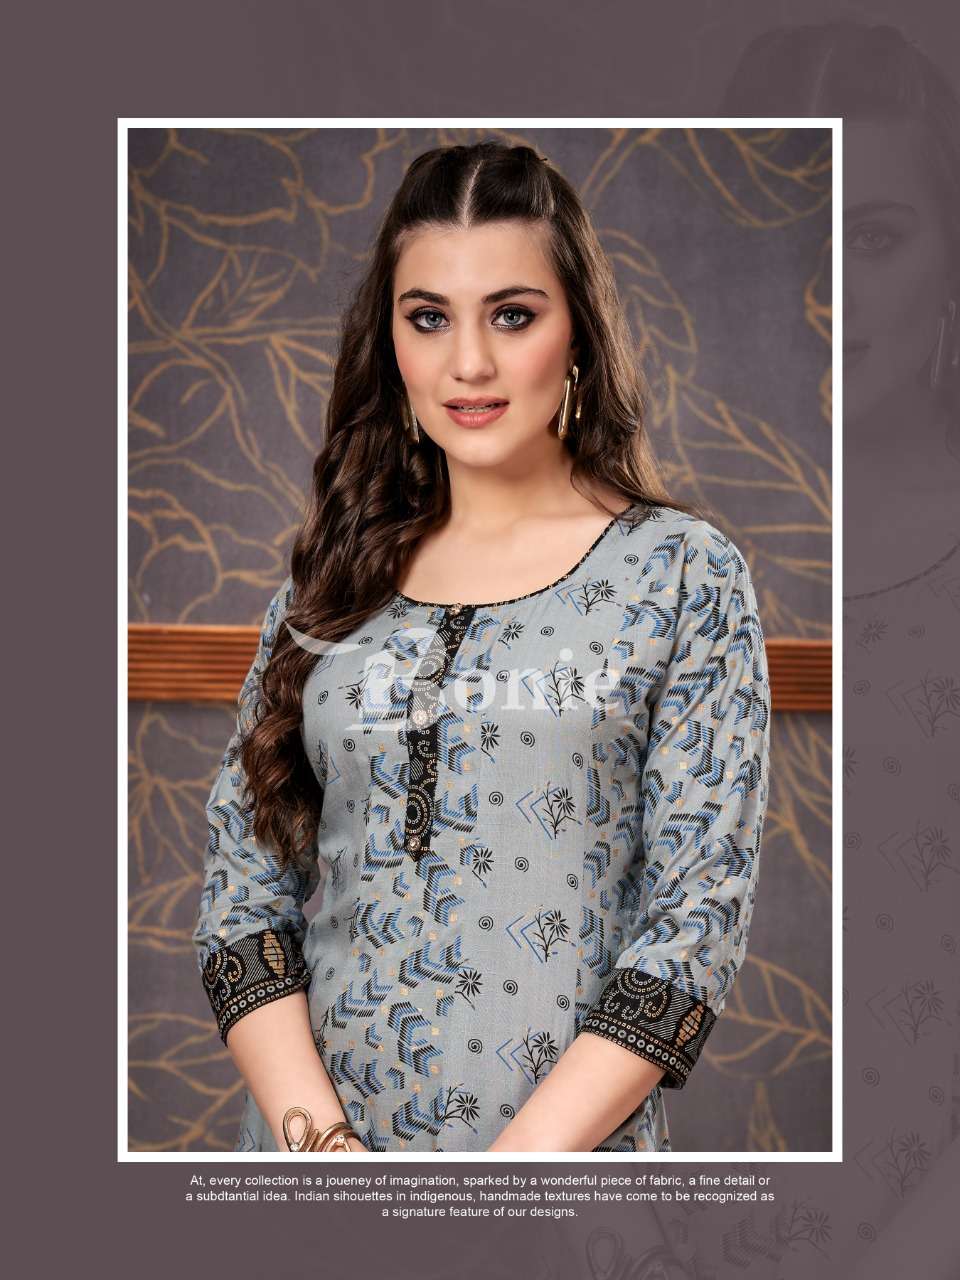 Know Which are the Best Materials for Designer Kurtis | Top 5 Types of Best  Materials for Kuris